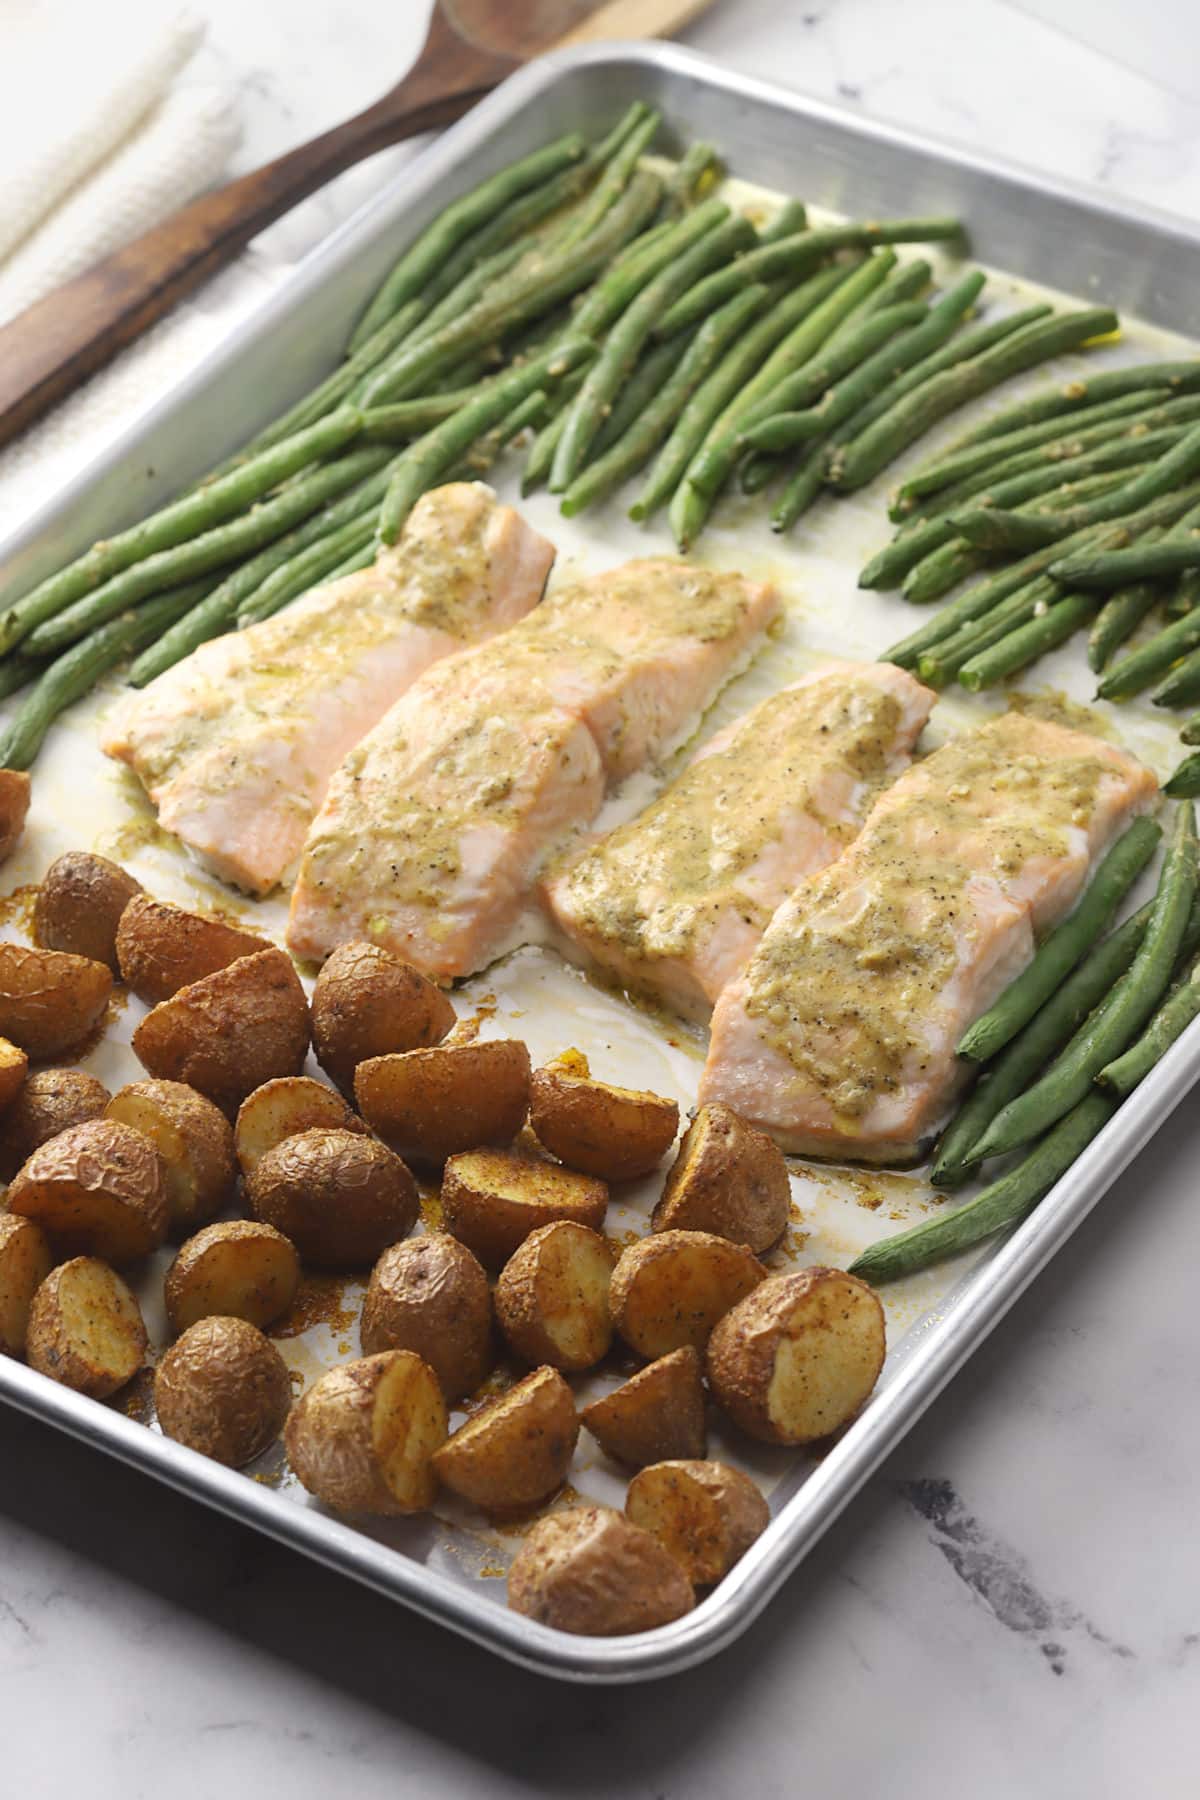 Baked salmon, green beans, and roasted potatoes on a sheet pan.